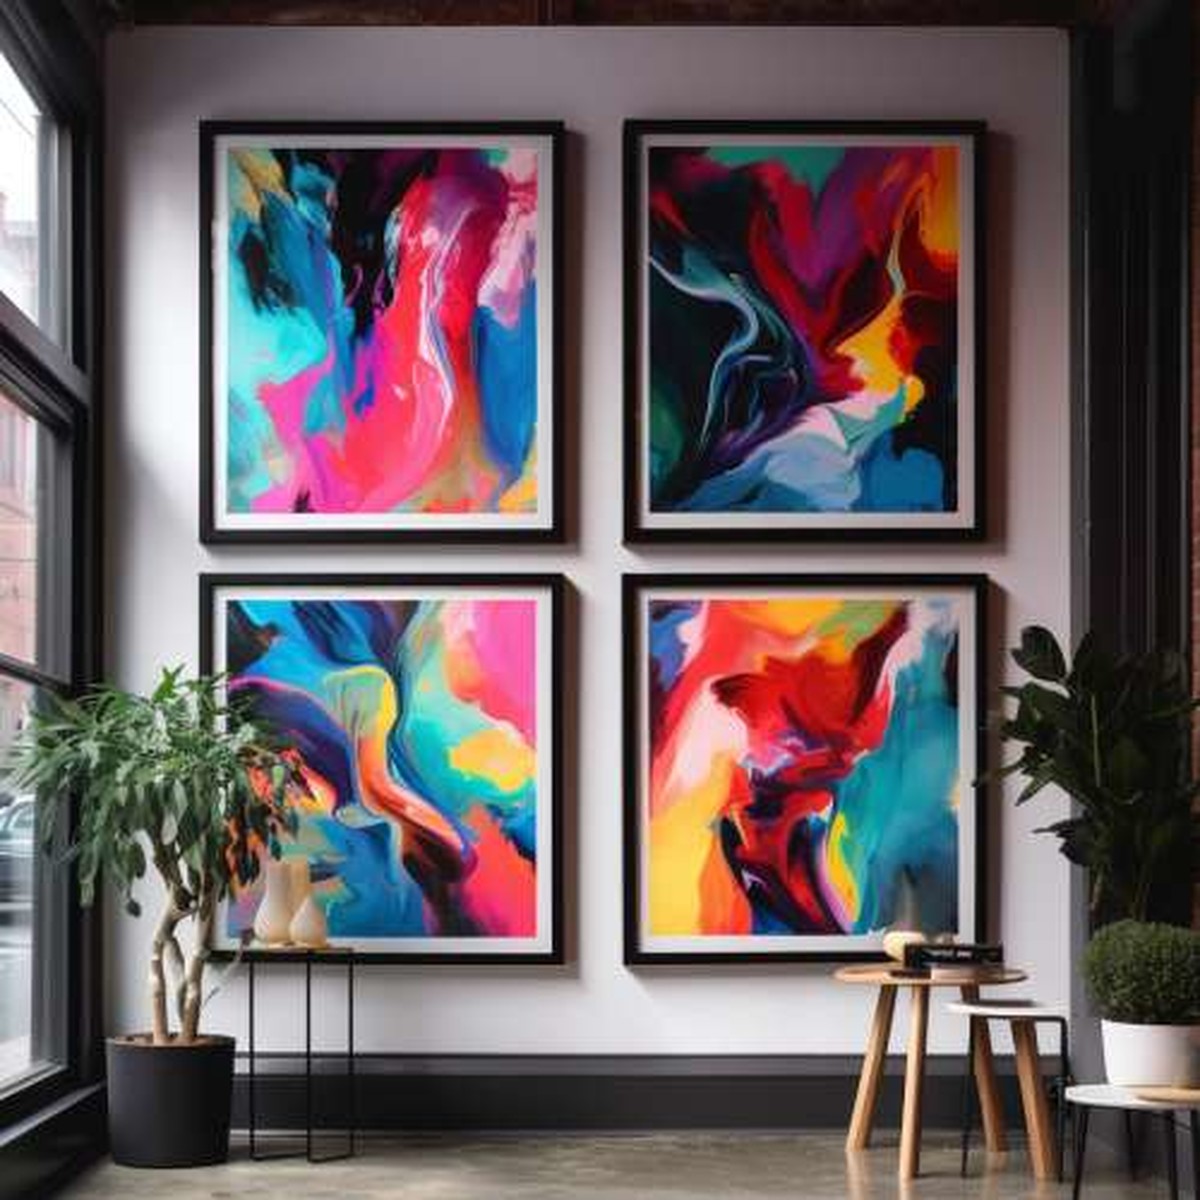 Four captivating art posters to install in windows of a modern house